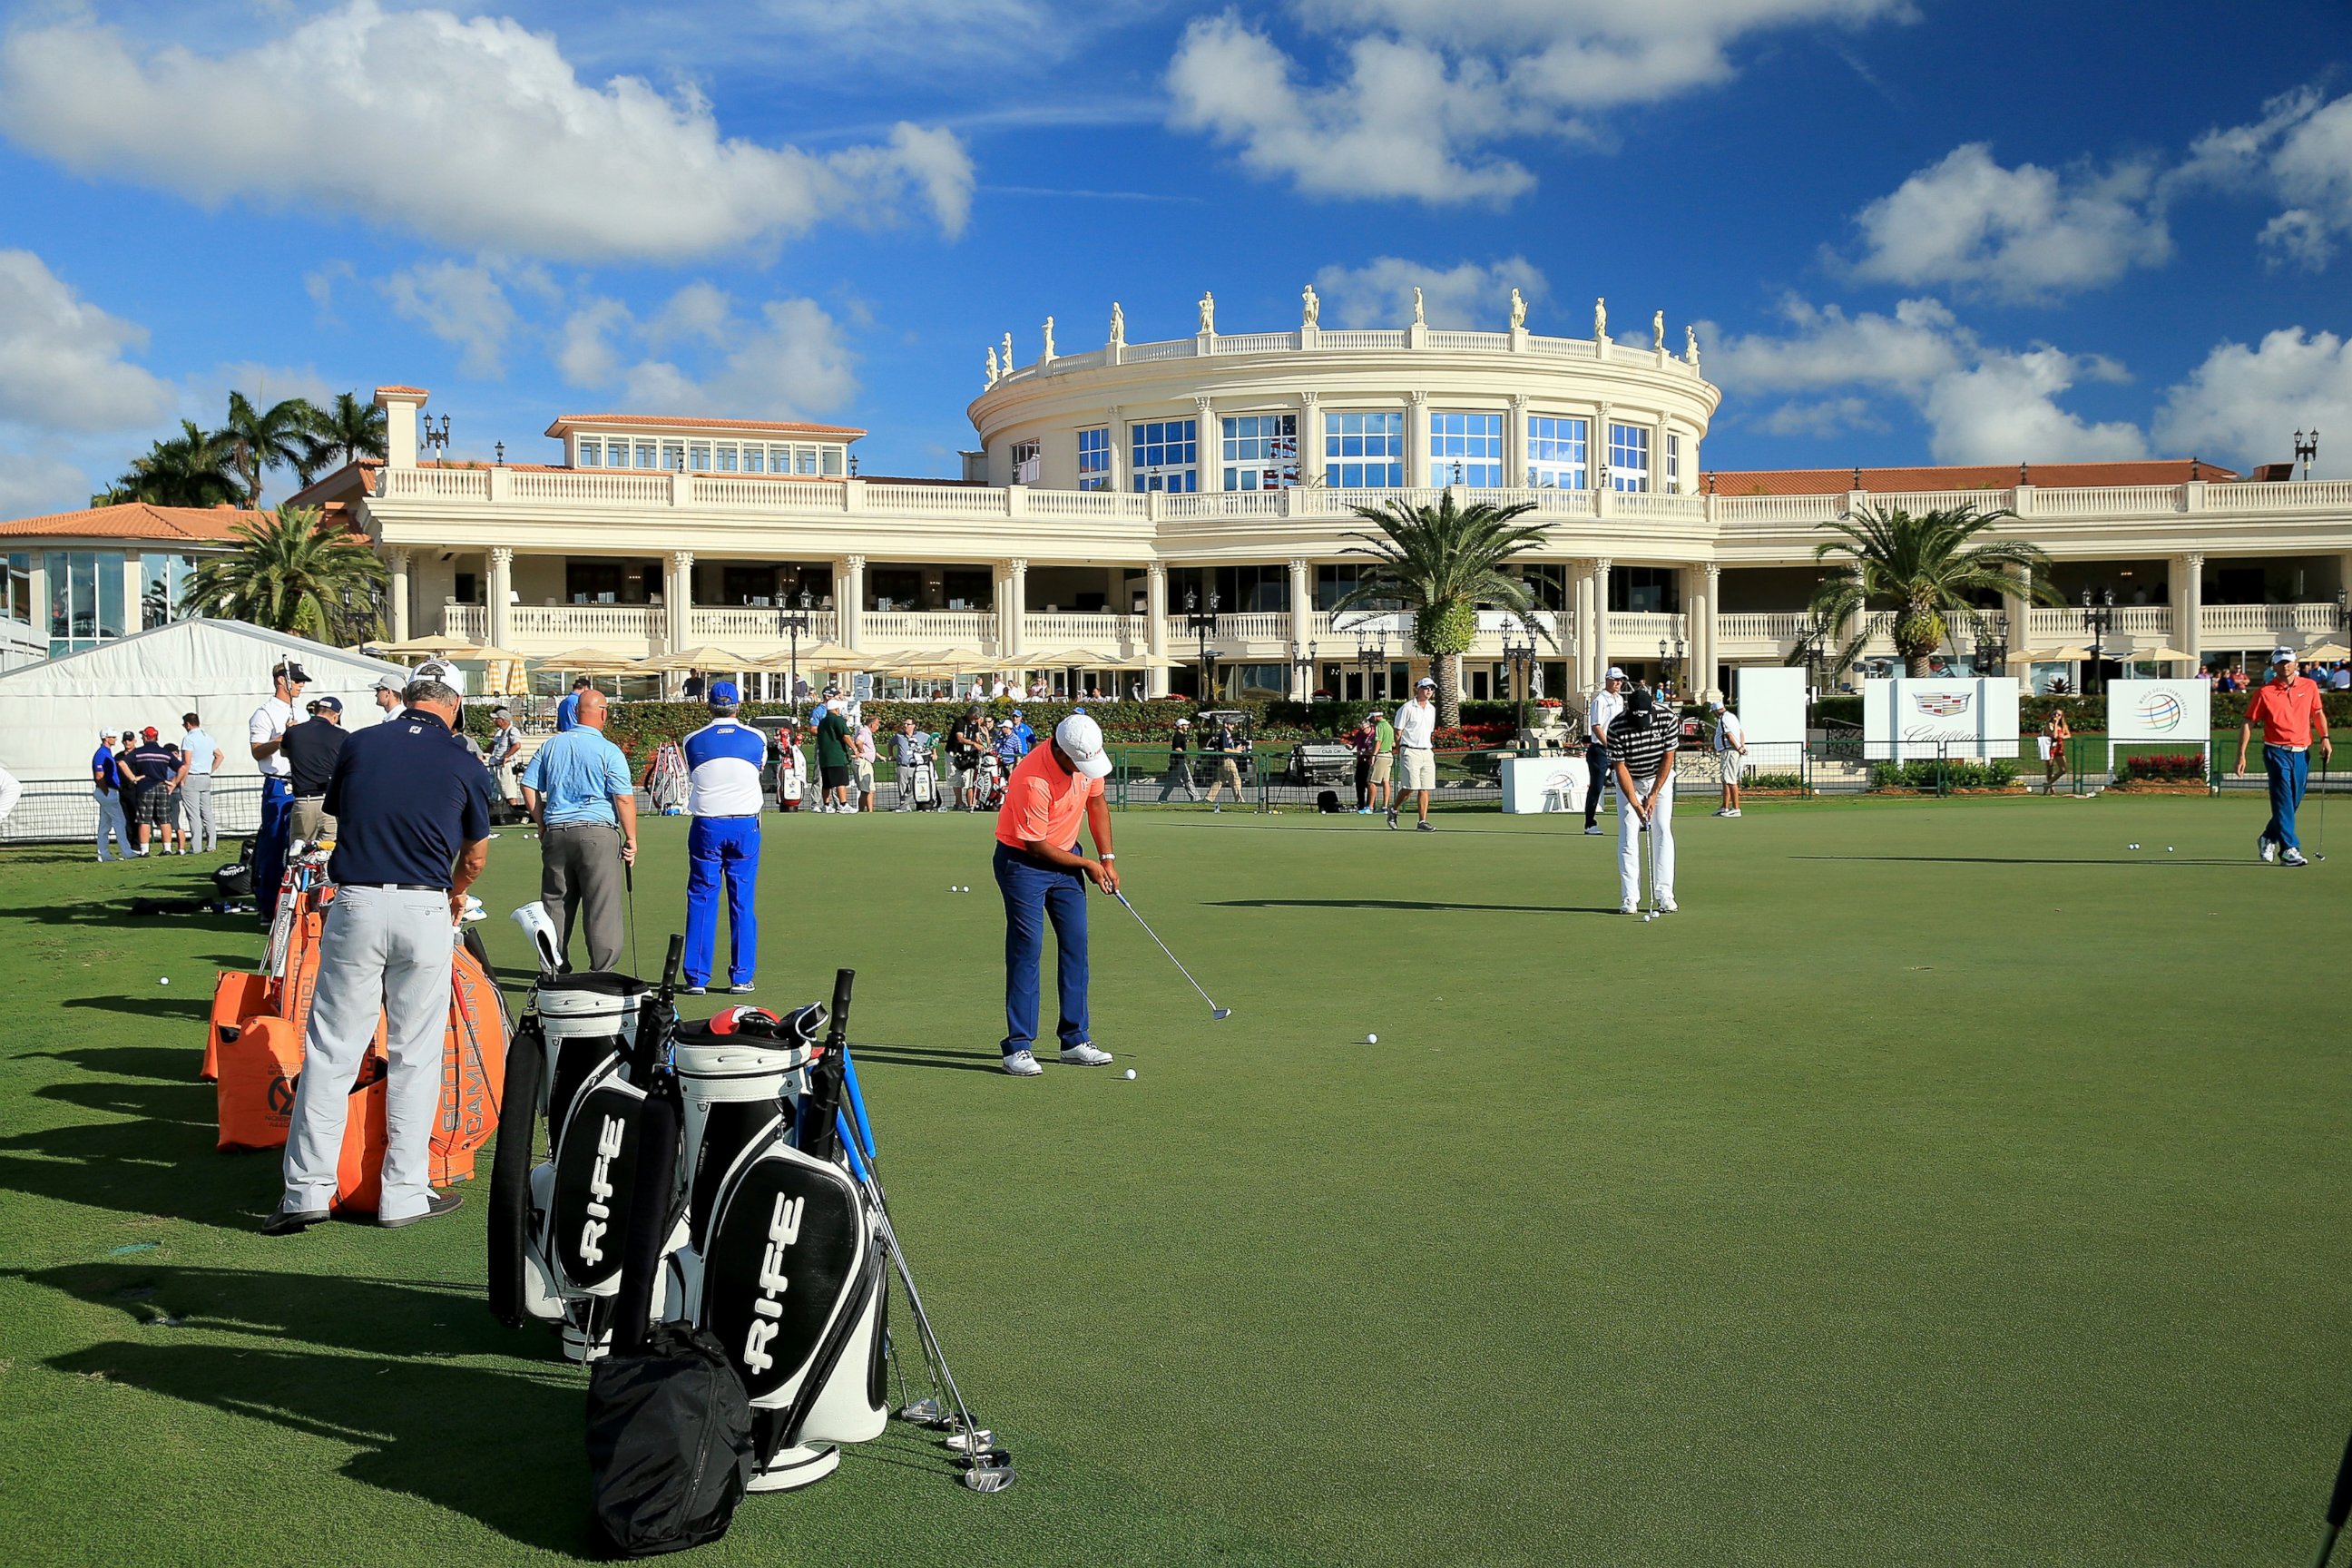 PHOTO: The putting green in front of the main resort building and clubhouse as a preview for the Cadillac Championship held on the Blue Monster Course at Trump National Doral is pictured March 3, 2015 in Doral, Fla.  